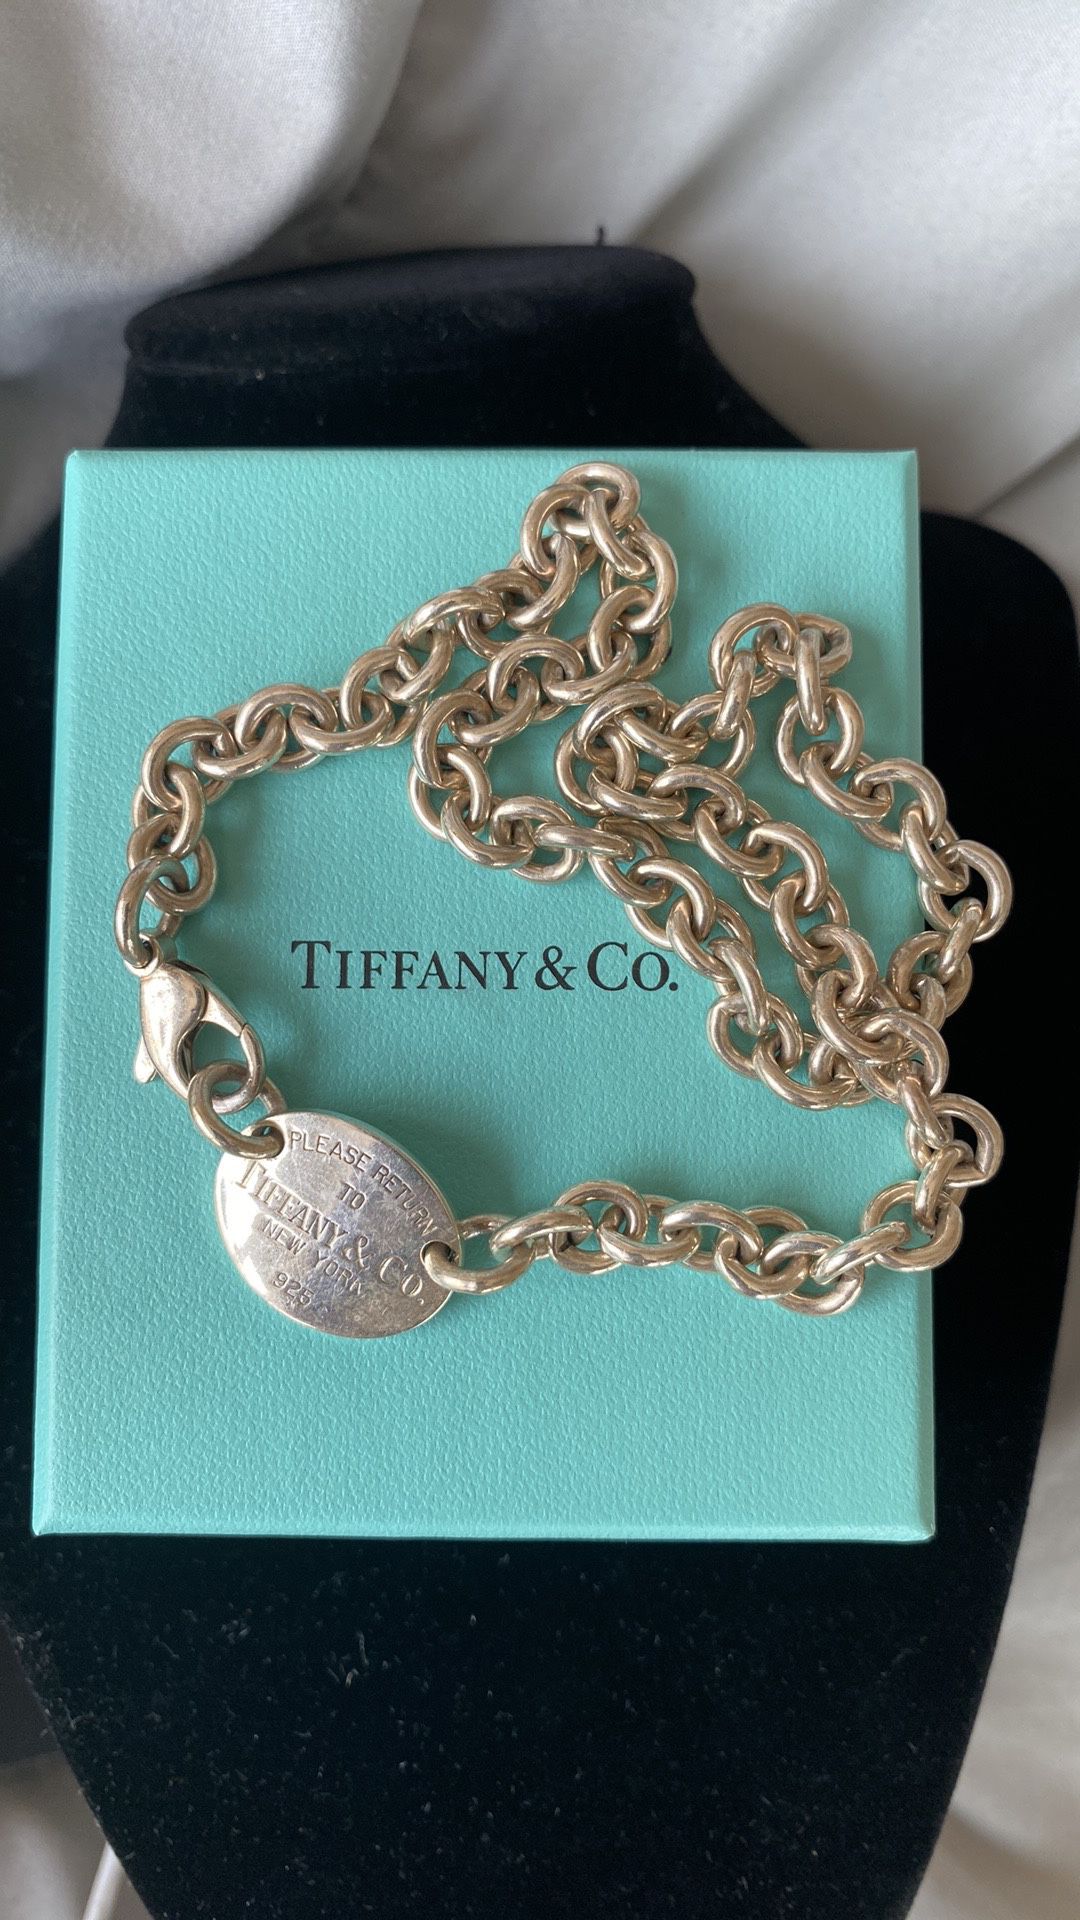 Tiffany & Co. .925 Silver Chain Link Necklace